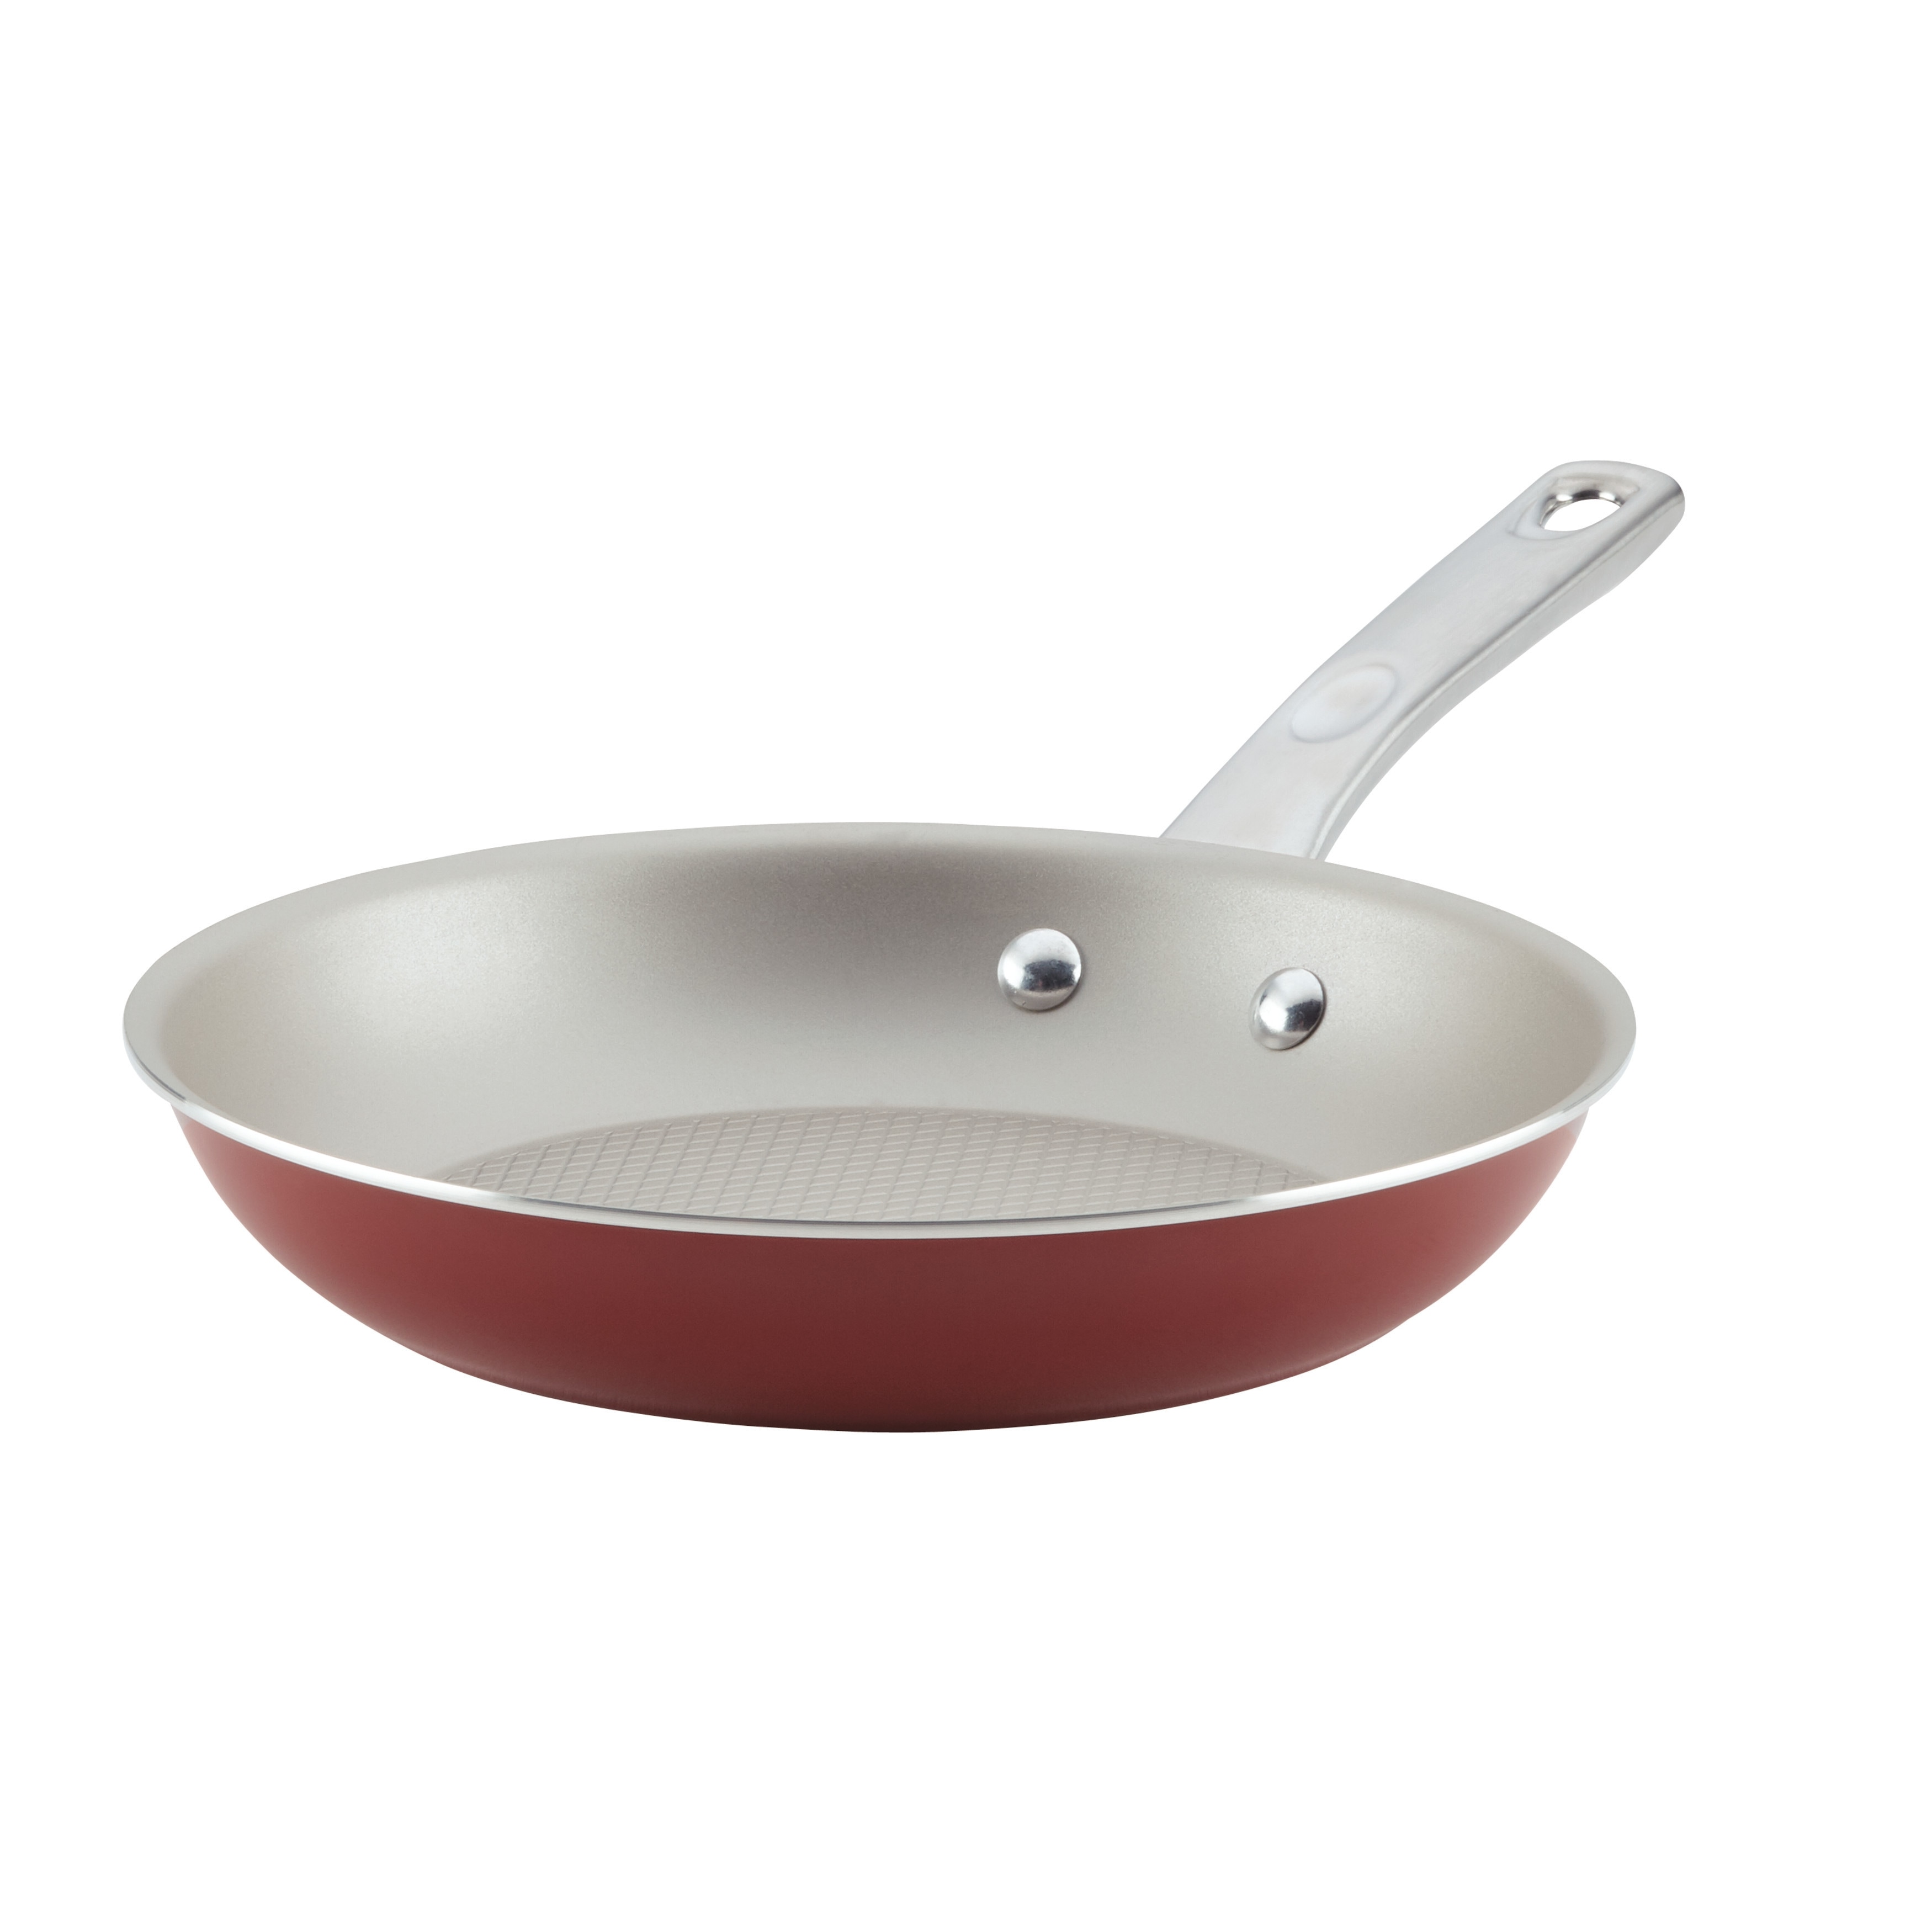 Ayesha Curry Home Collection Porcelain Enamel Nonstick Frying Pan